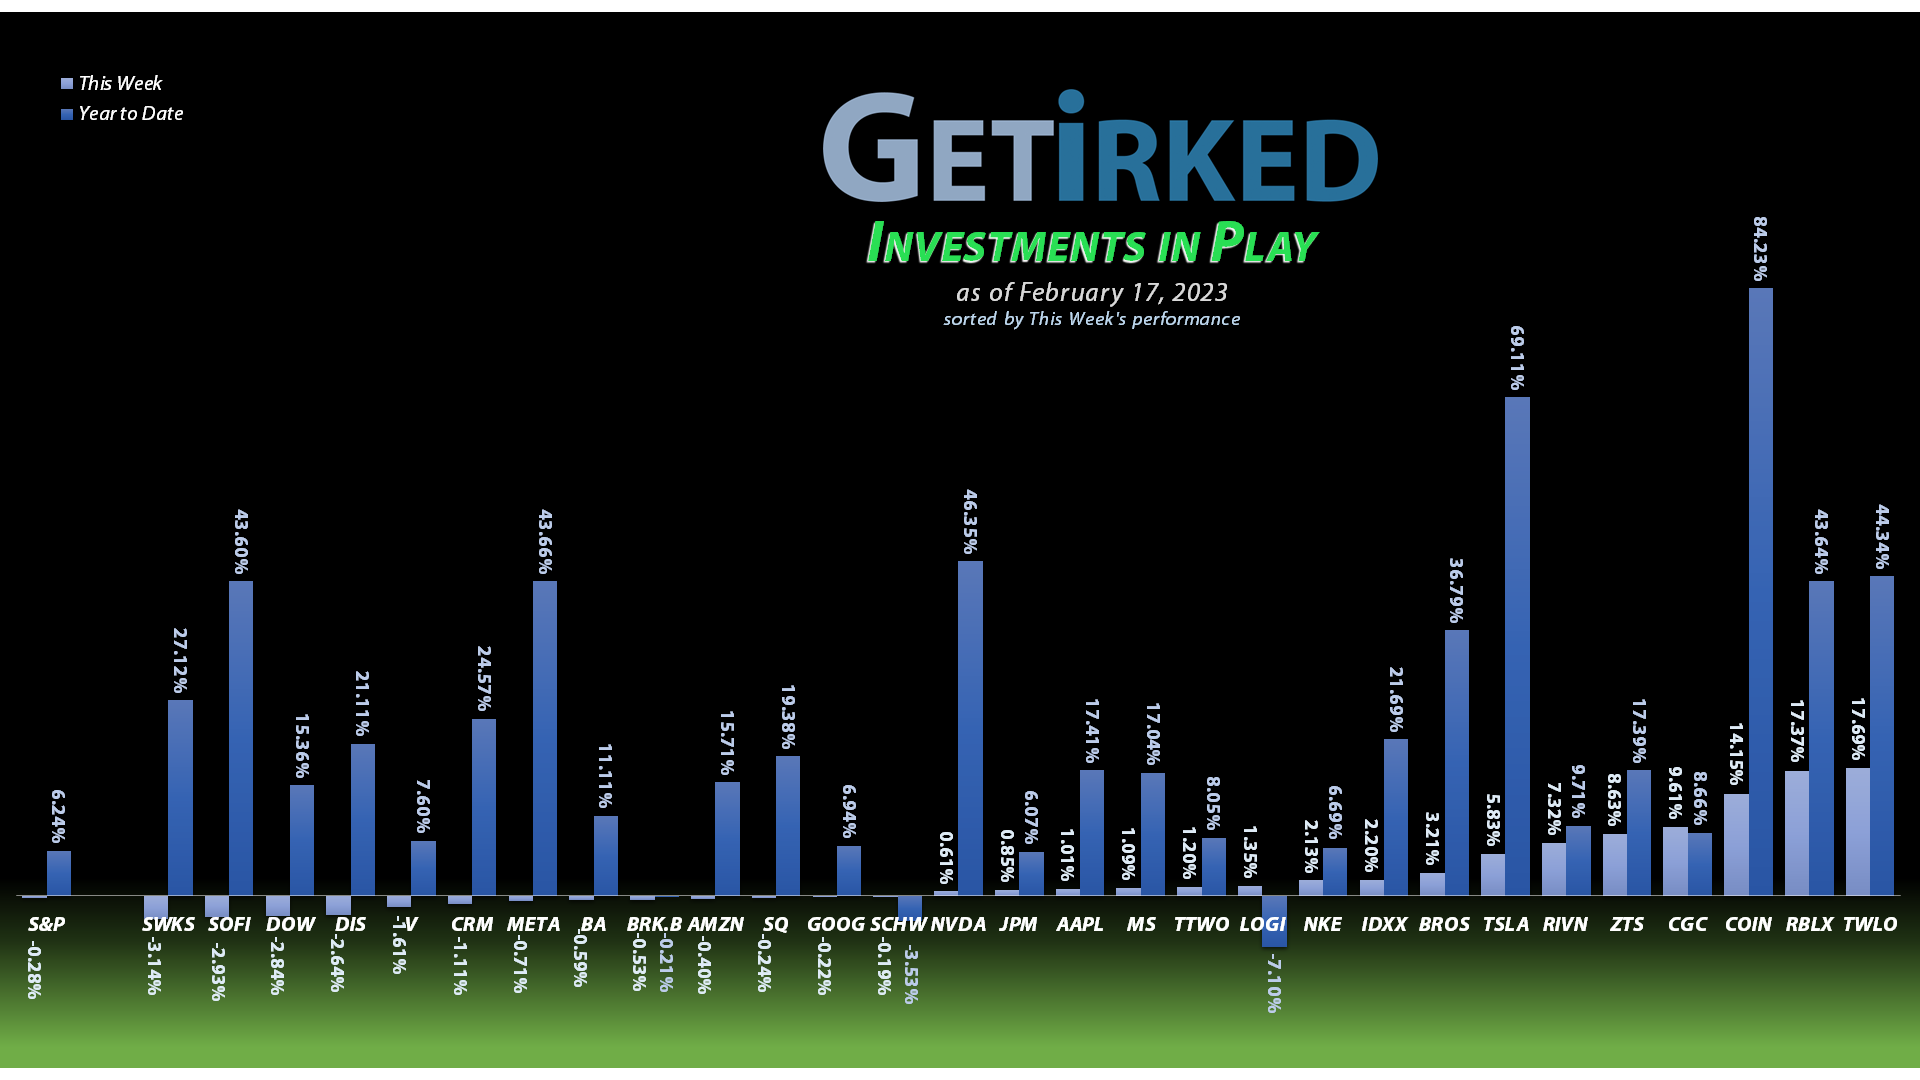 Get Irked - Investments in Play - February 17, 2023